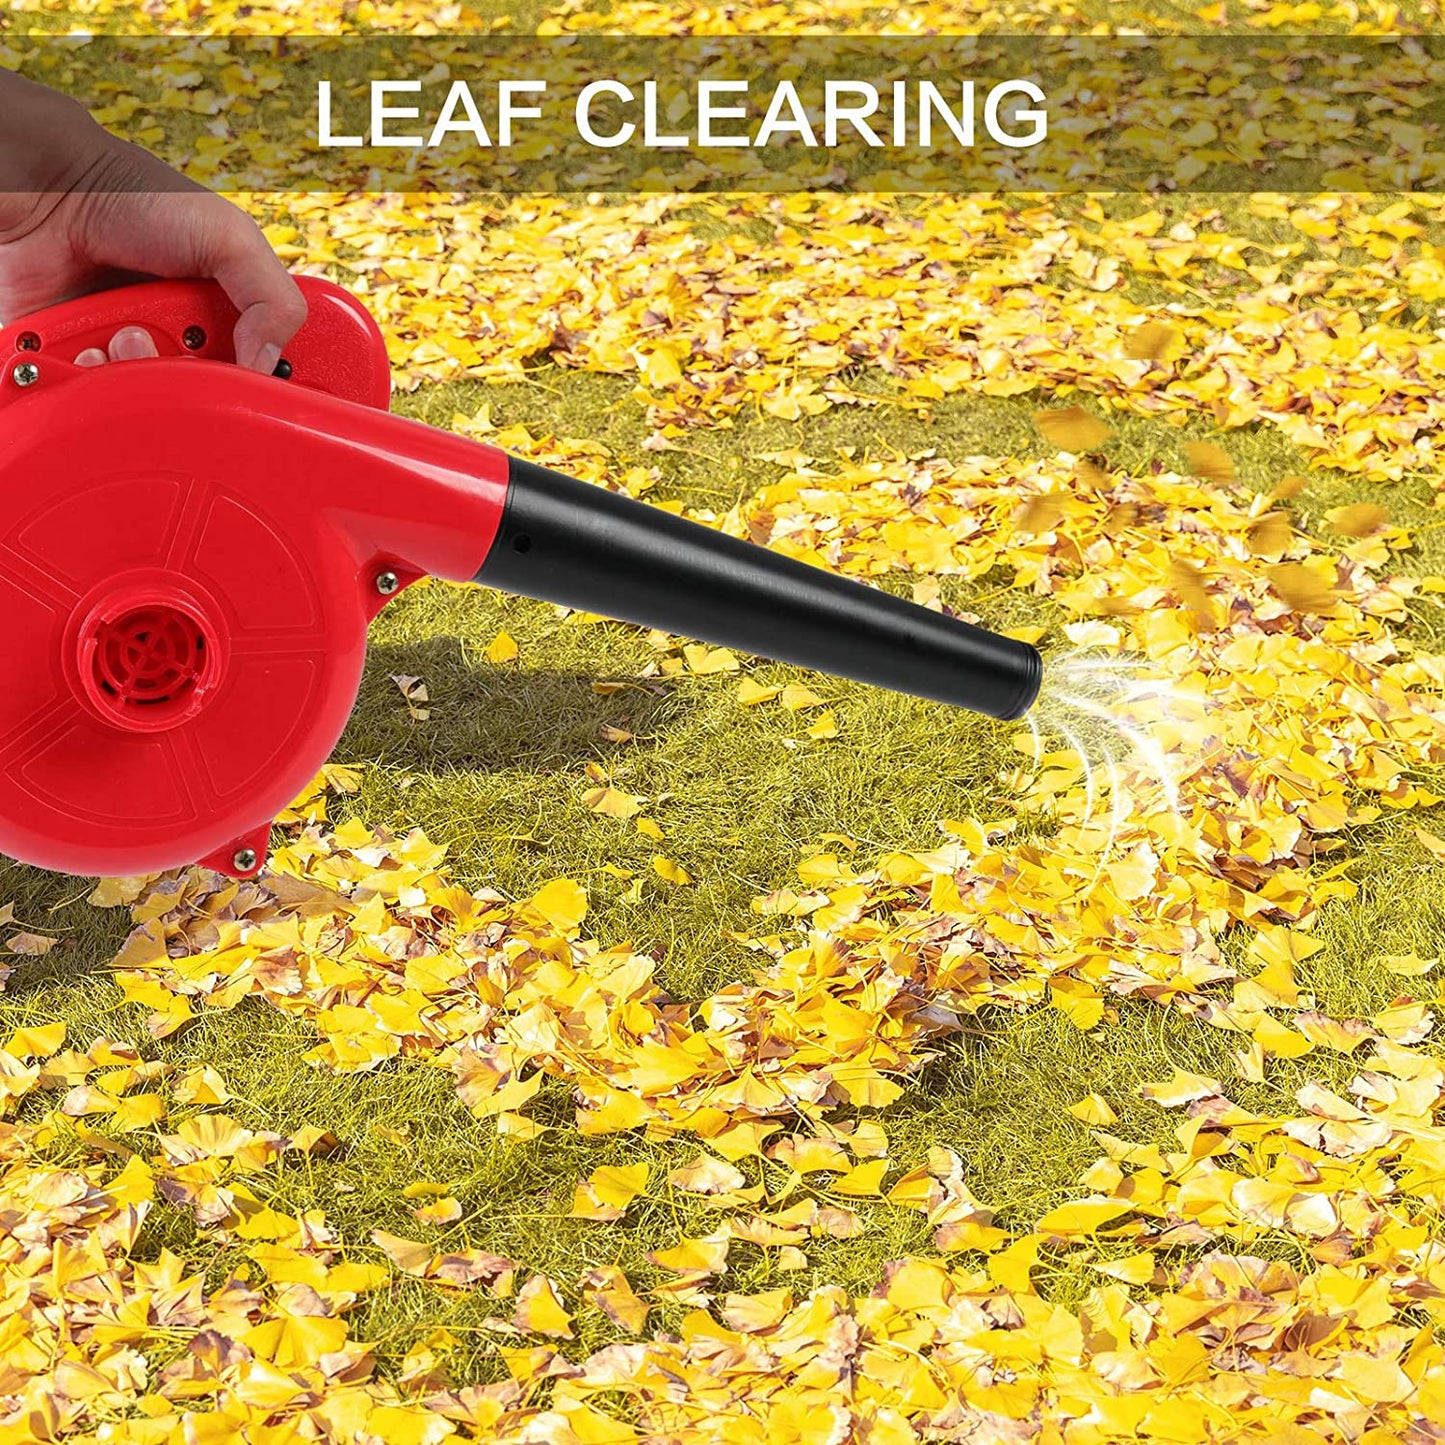 Handheld Electric Leaf Blower 110V 700W/1000W 5.5A 2 in 1 Corded Vacuum & Sweeper Lightweight Multifunctional Mini Leaf Blower for Home Porch Patio Computer Car